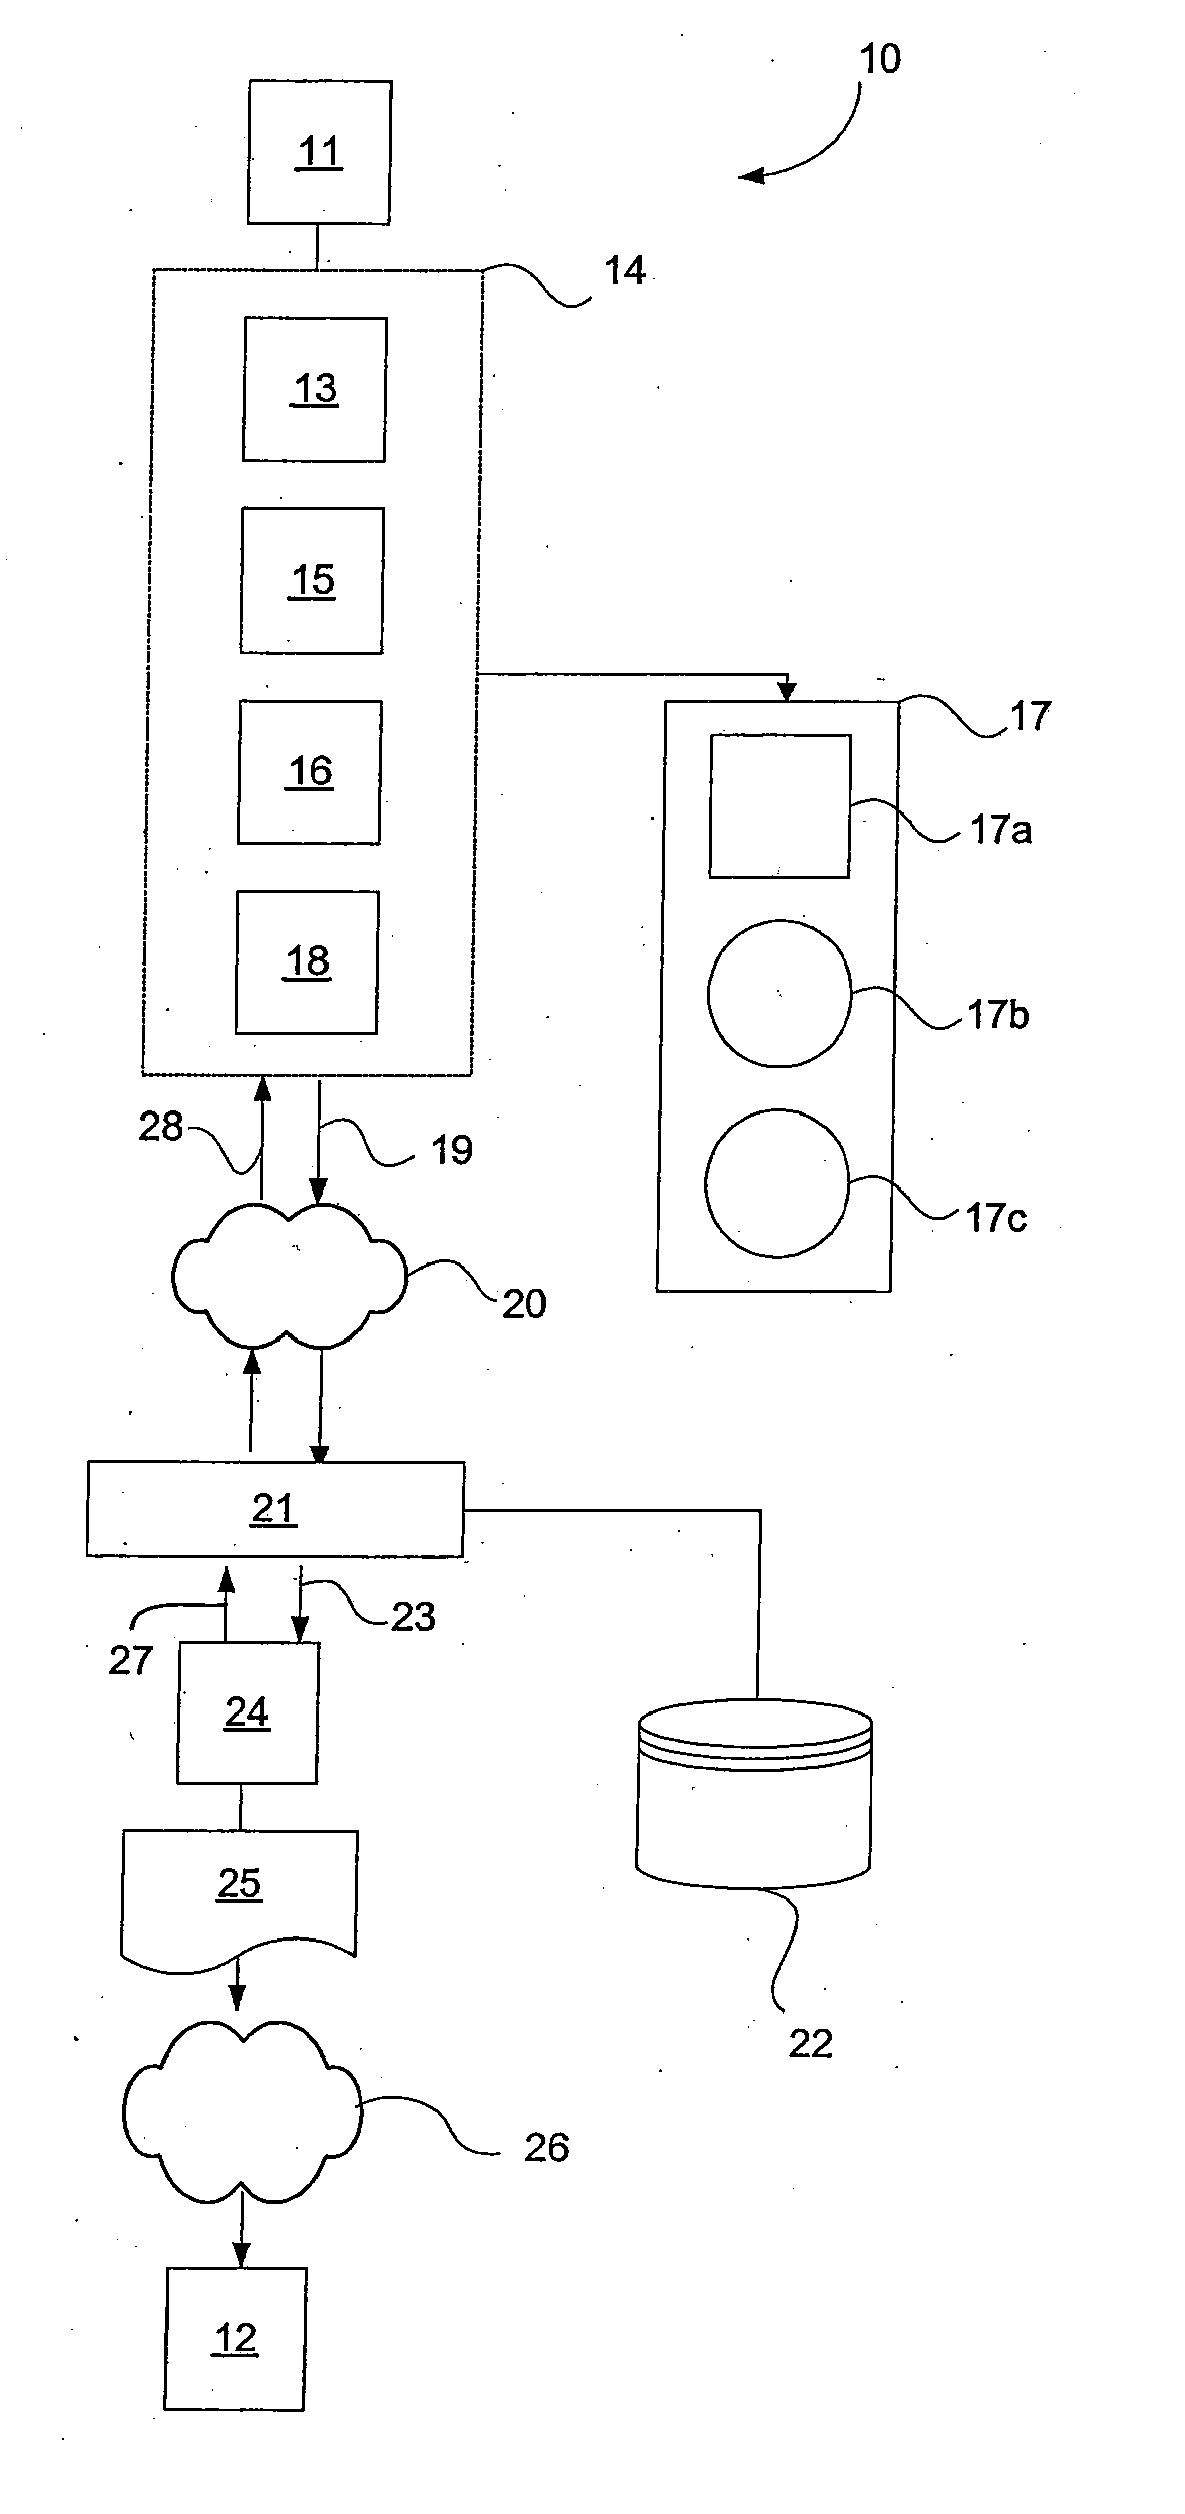 Delivery of Electronic Documents Into a Postal Network